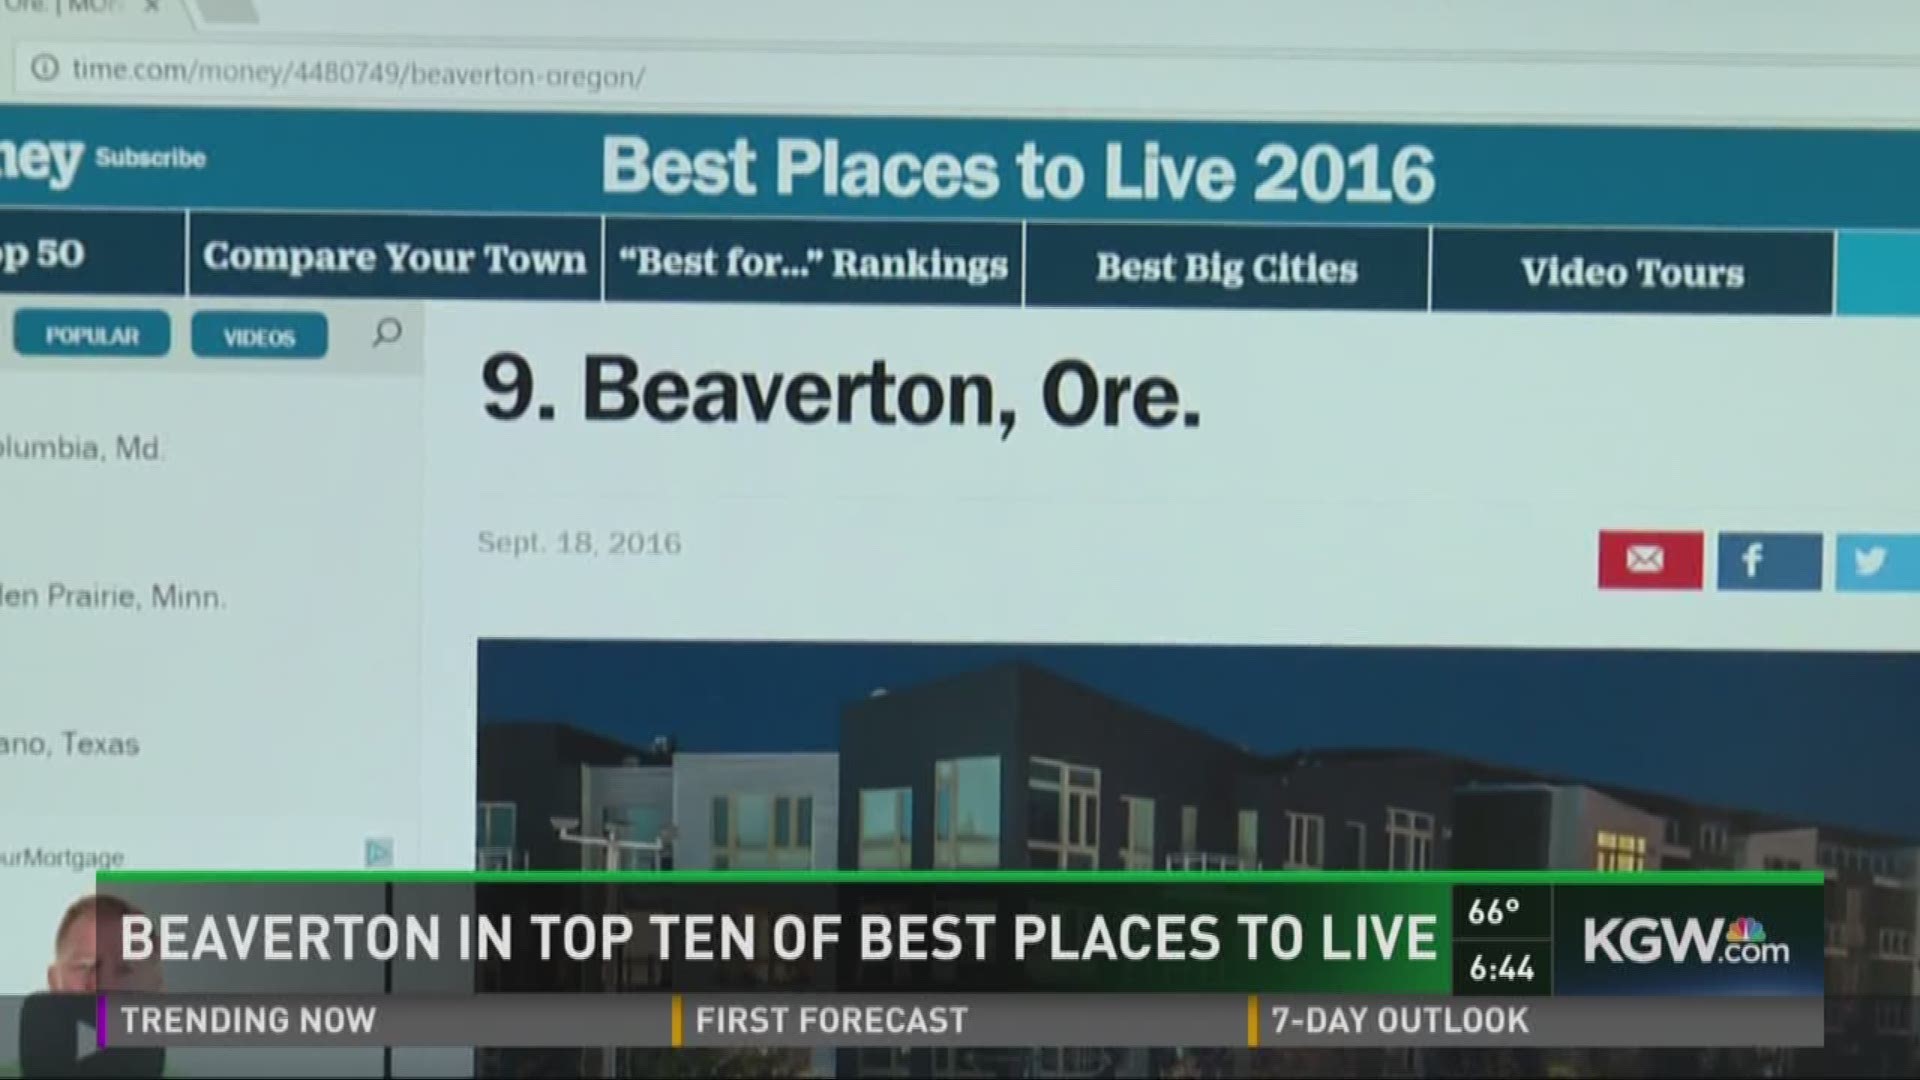 Beaverton in top 10 of Best Places to Live